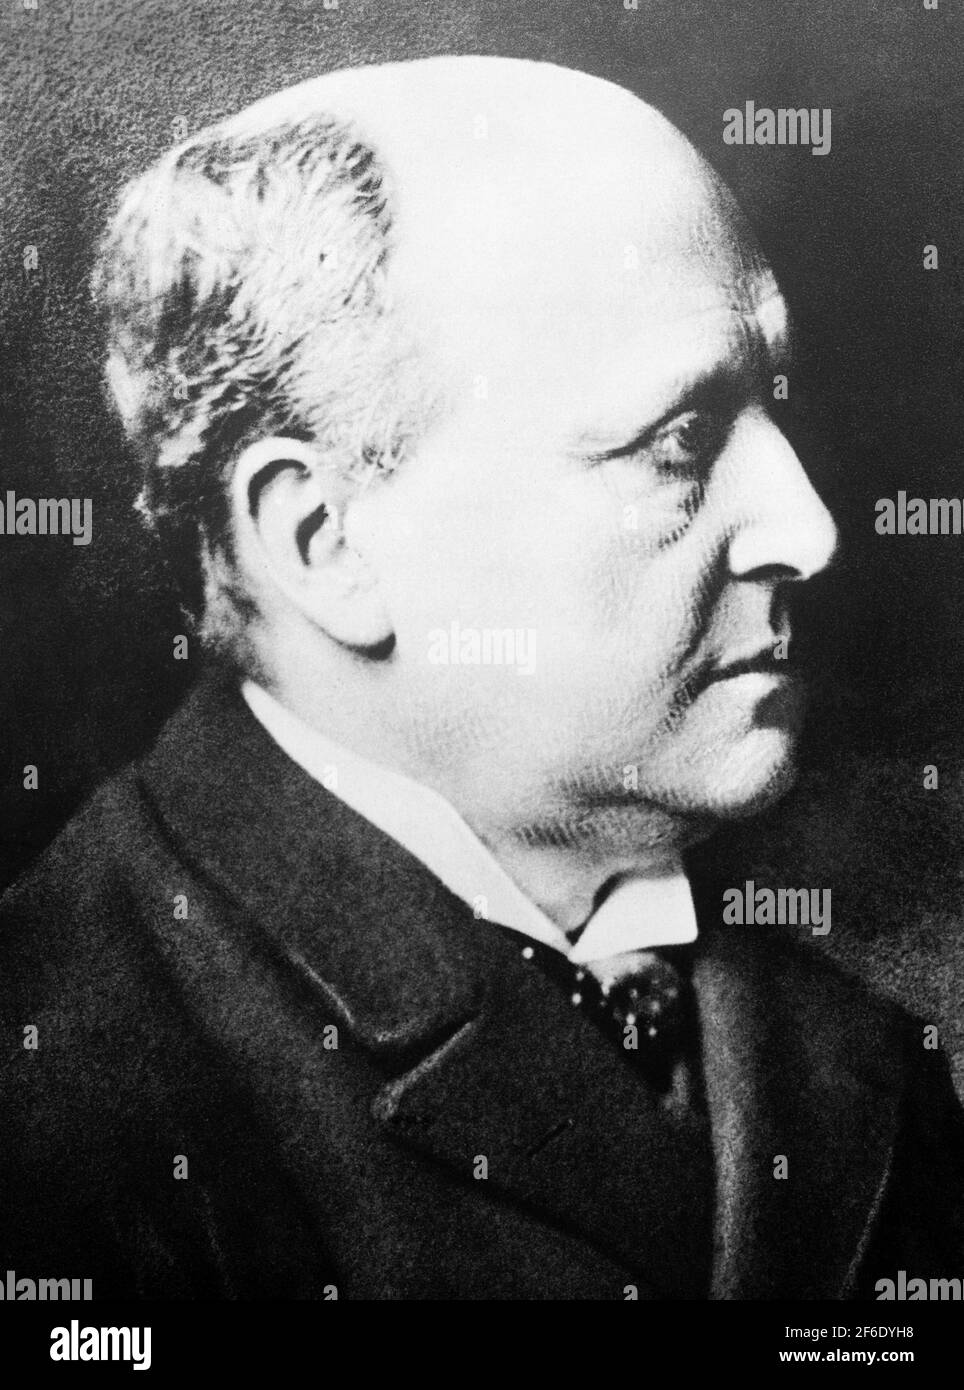 Vintage portrait photo of American author Henry James (1843 – 1916). Photo by Bain News Service circa 1910. Stock Photo